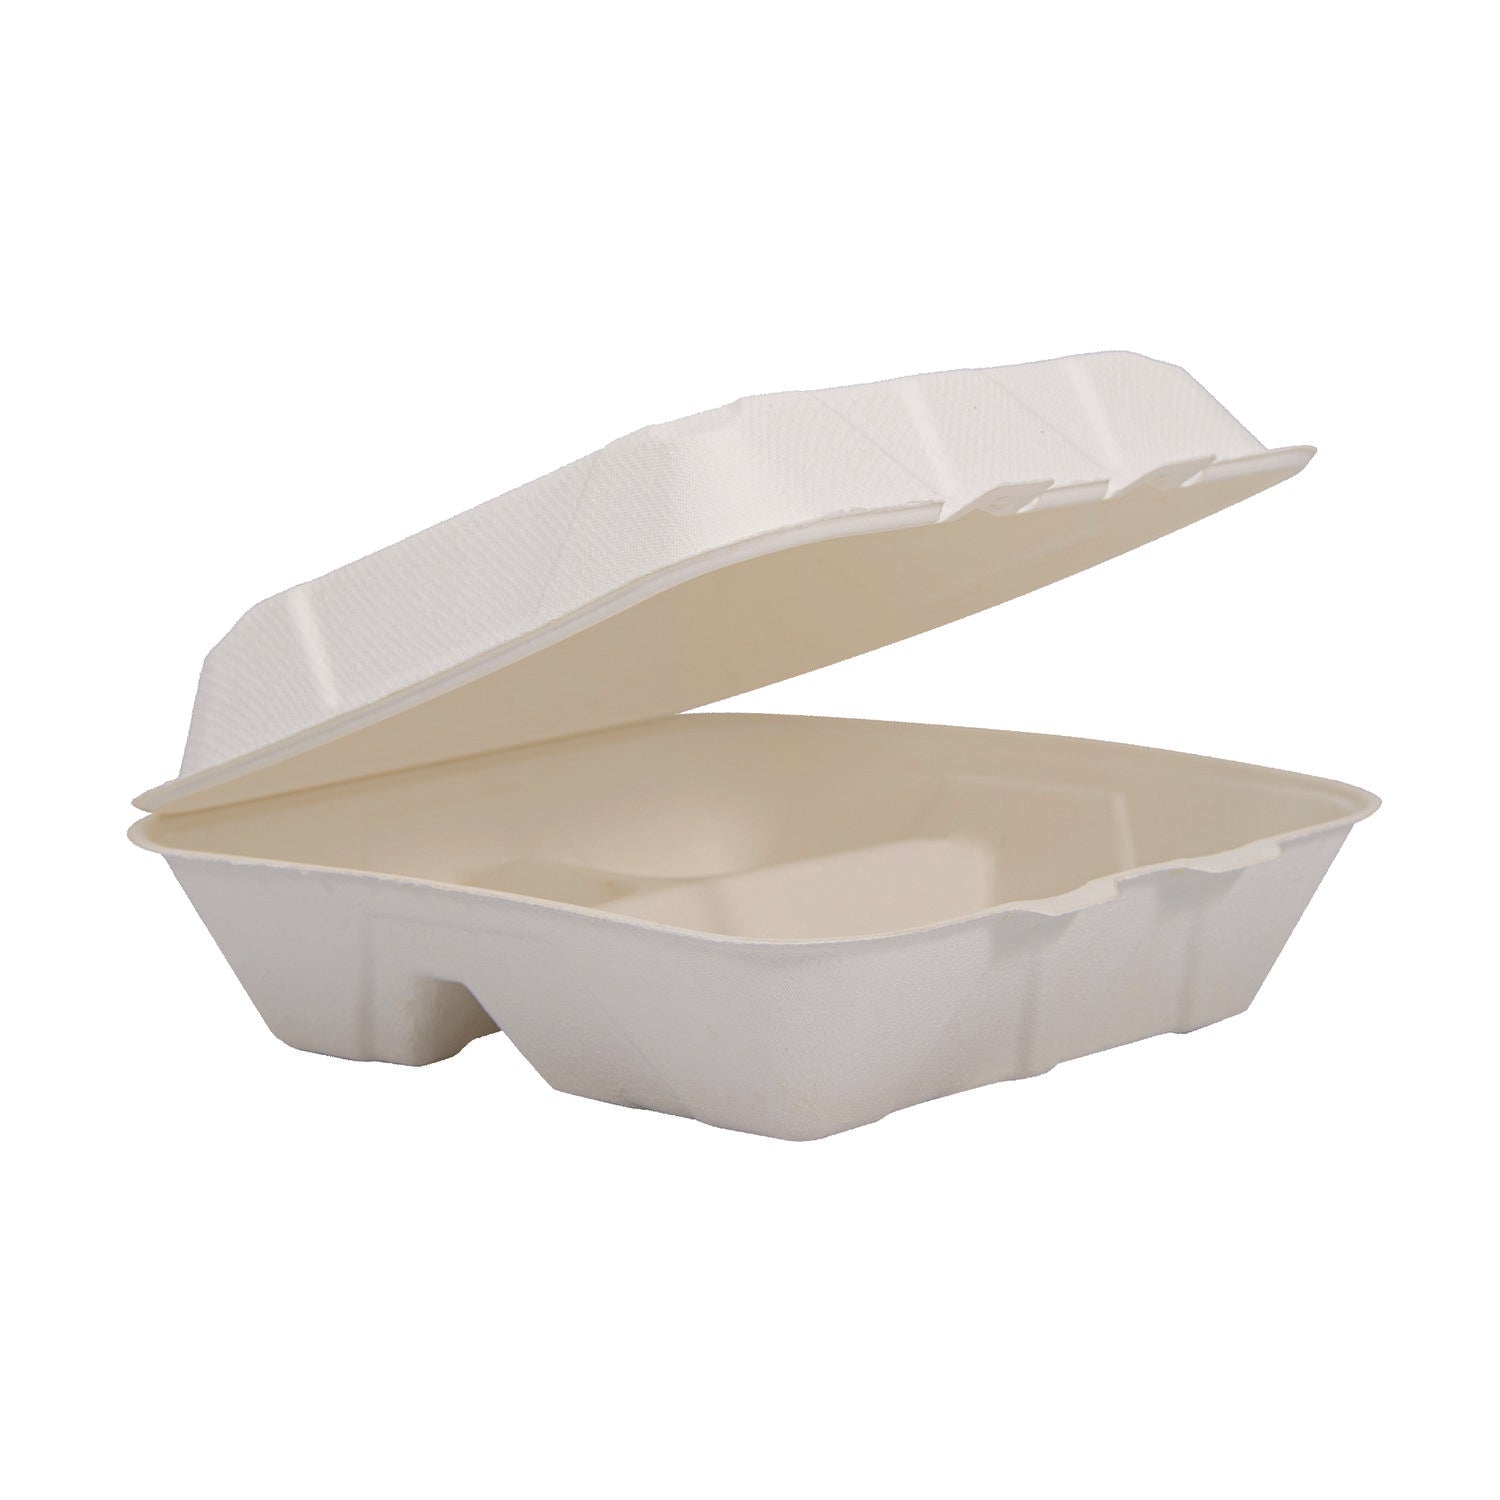 compostable-fiber-hinged-trays-proplanet-seal-3-compartment-925-x-945-x-217-ivory-molded-fiber-200-carton_dcchc9fbr3 - 1